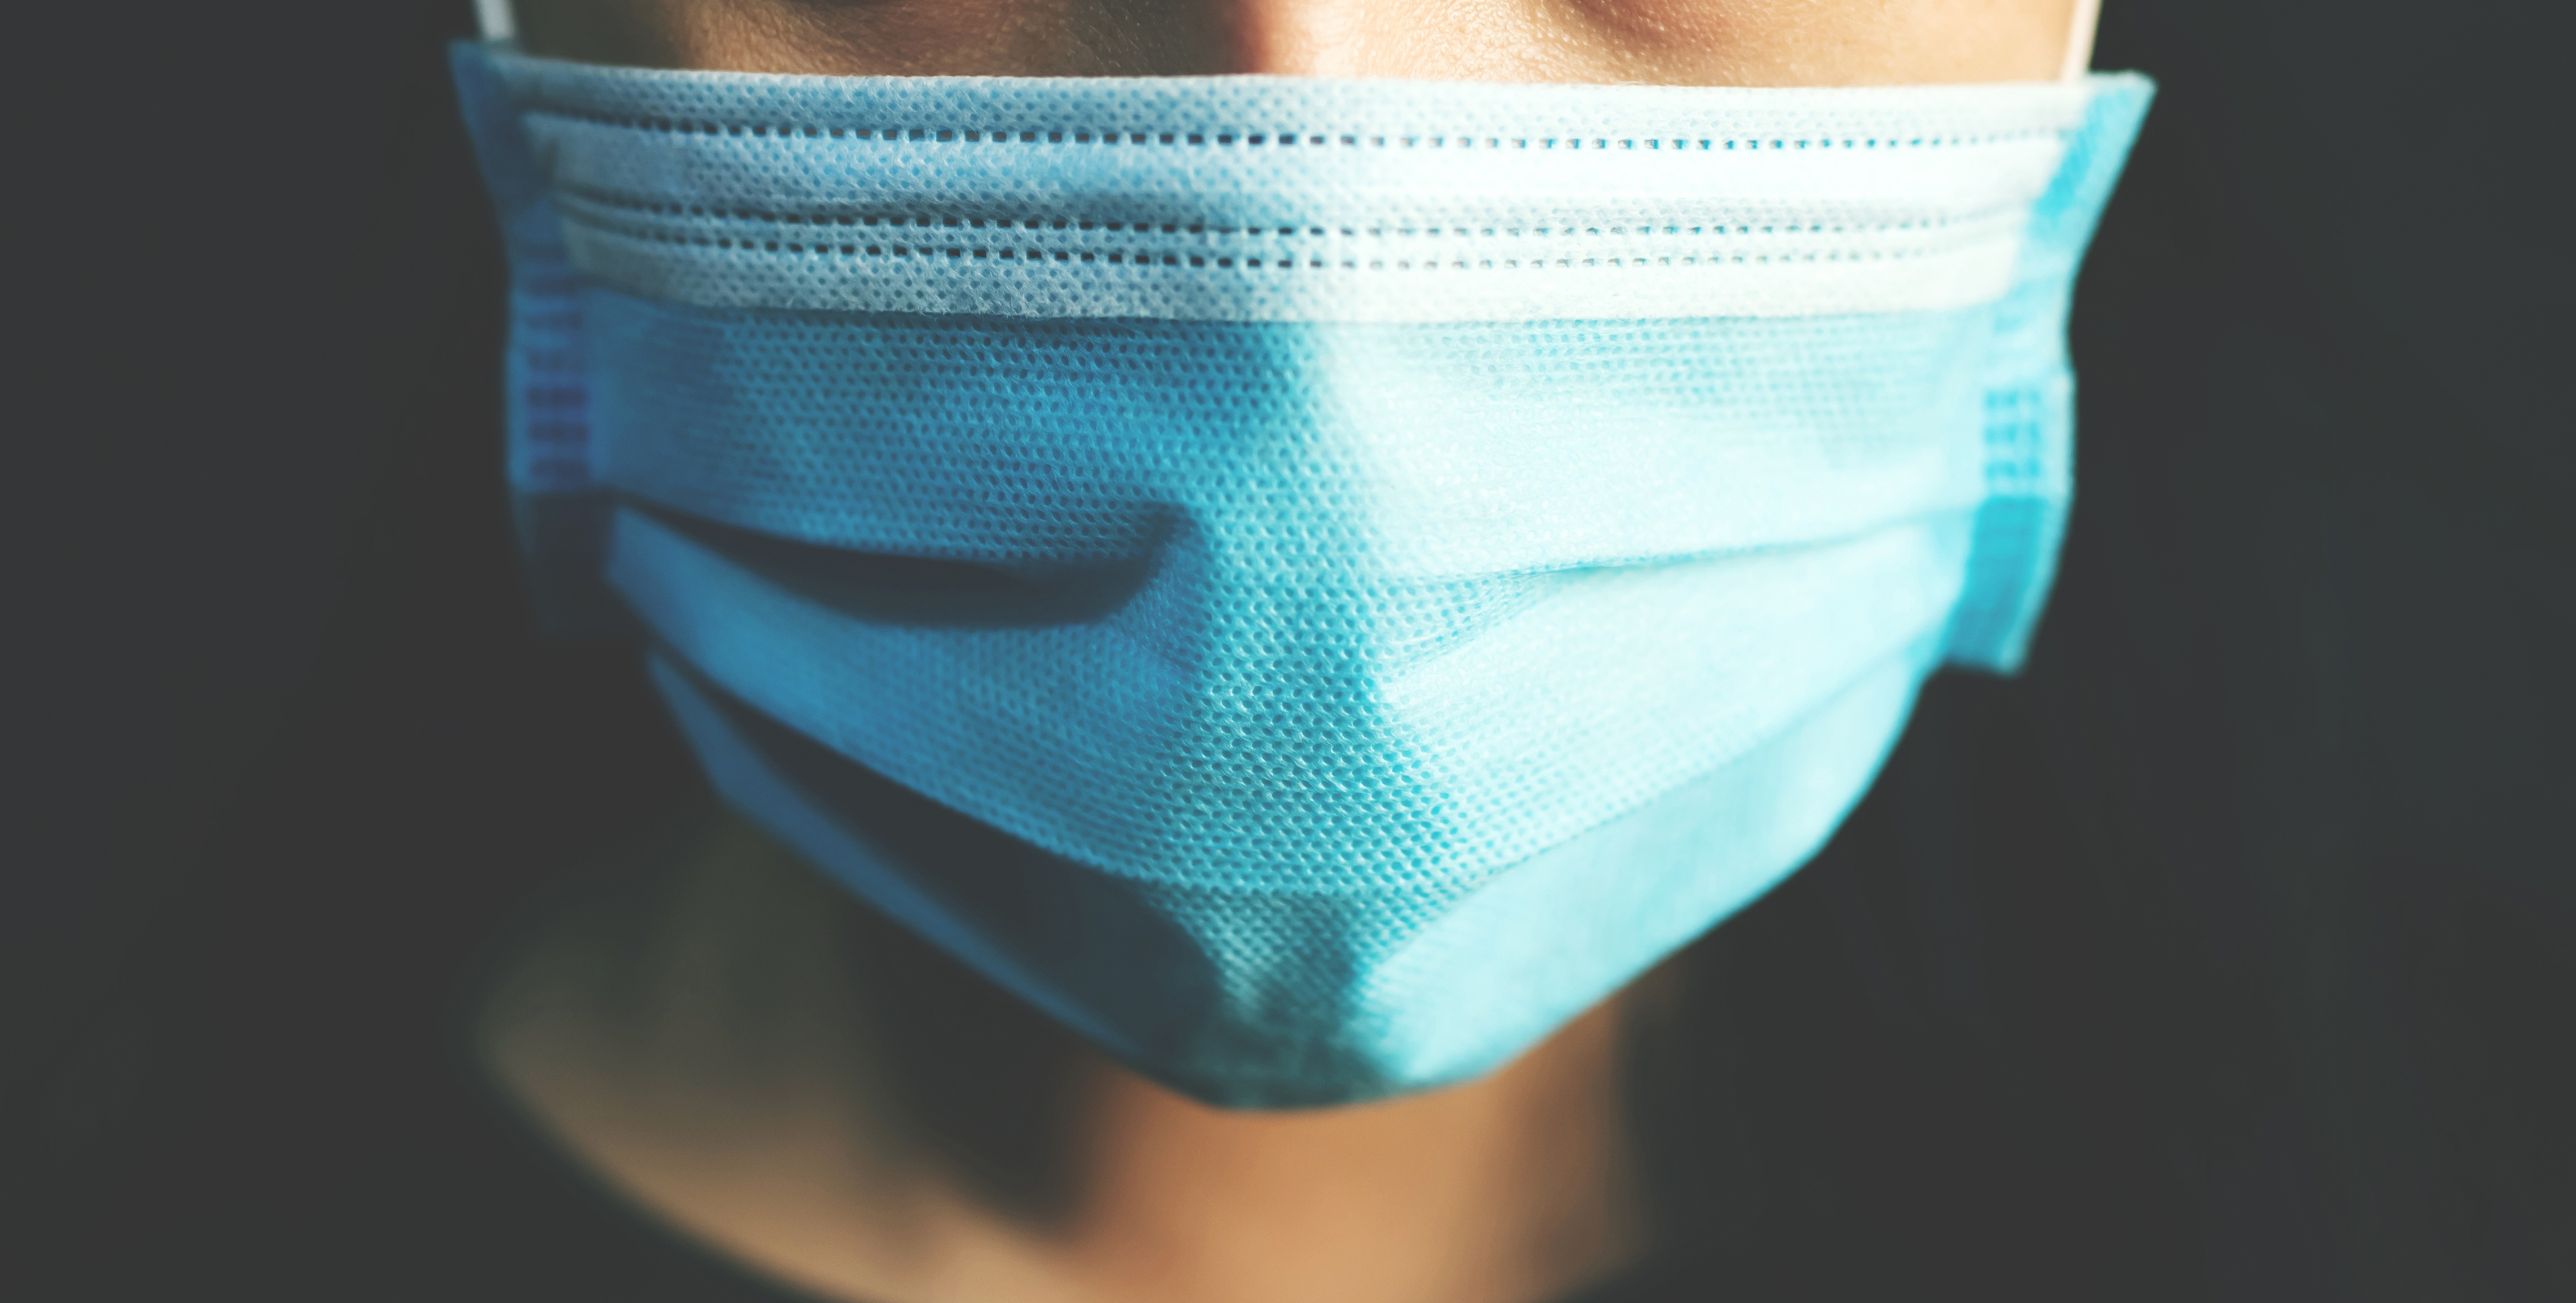 Closeup of the face of a person wearing a paper medical mask in front of a dark background.